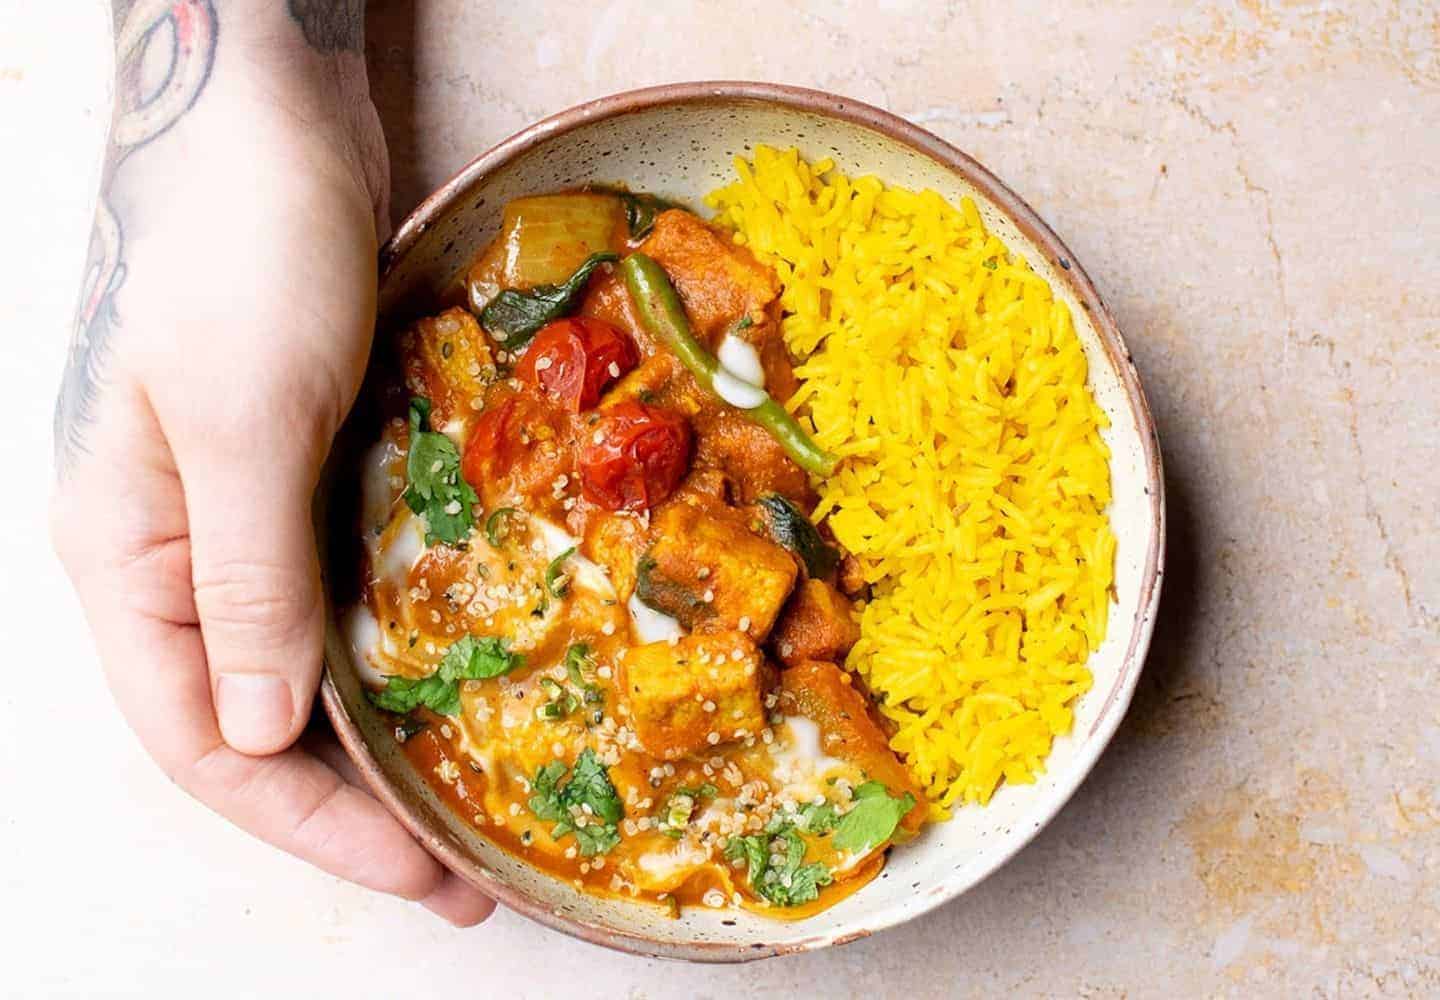 A bowl of veg jalfrezi being held with one hand, and tattoos can be seen on the top of the hand. Coriander, pilau rice, tomatoes, onion and quorn can be seen in the bowl